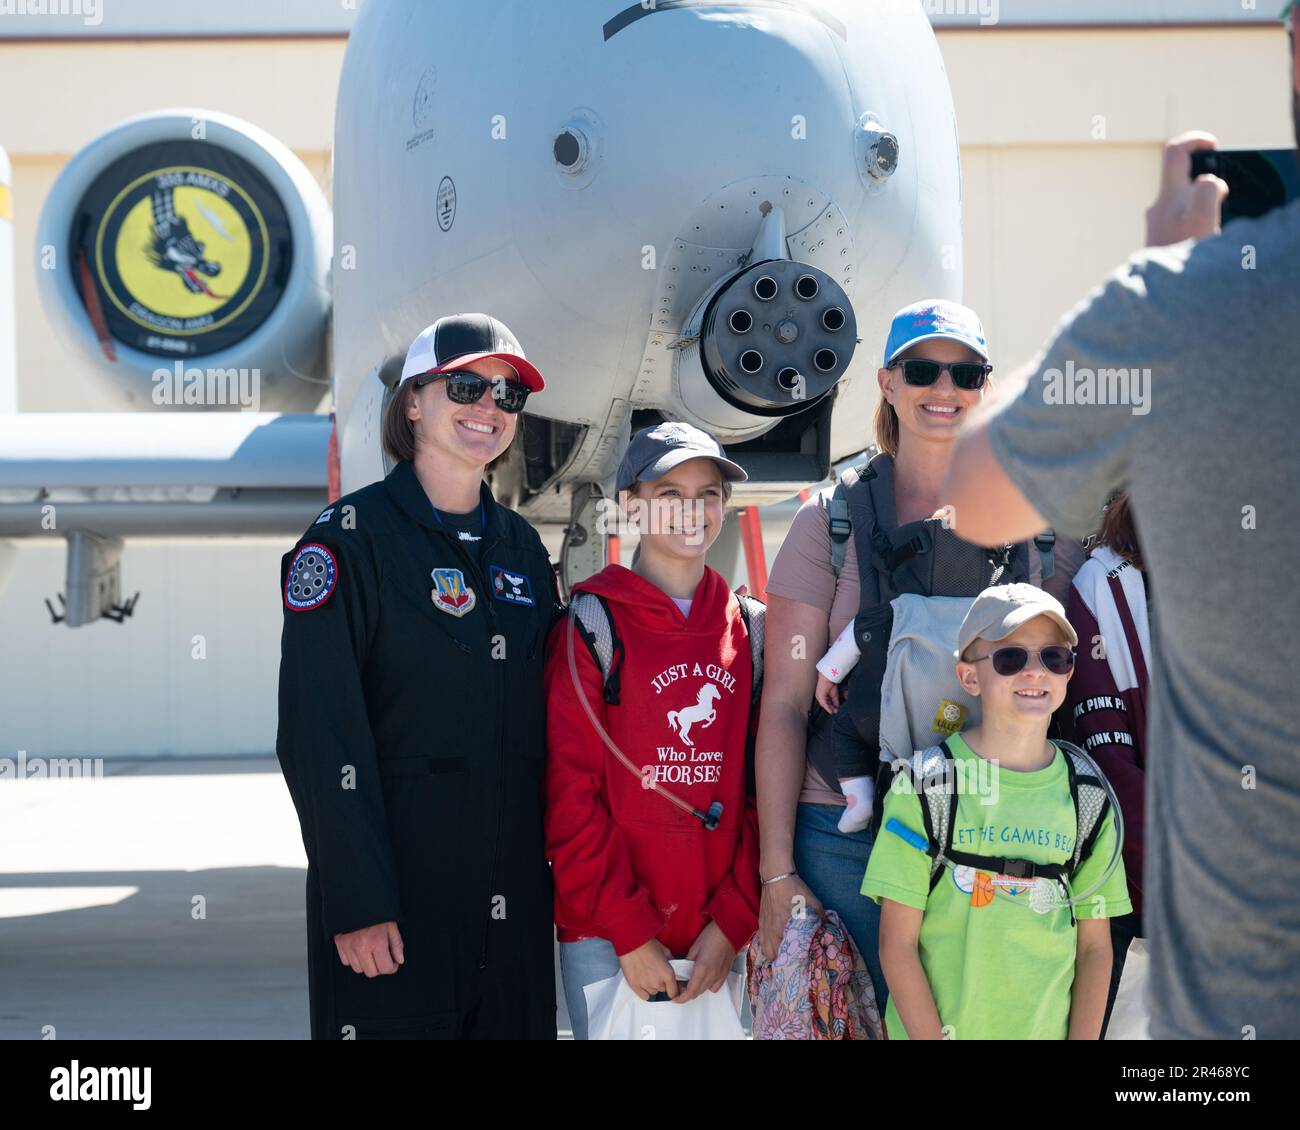 U.S. Air Force Capt. Lindsay “MAD” Johnson, A-10C Thunderbolt II Demonstration team commander and pilot, interacts with air show attendees at Davis-Monthan Air Force Base, Arizona, March 26, 2023. The airshow was open to the public as a way to connect the base and local community while also highlighting the mission and capabilities of the U.S. Air Force. Stock Photo